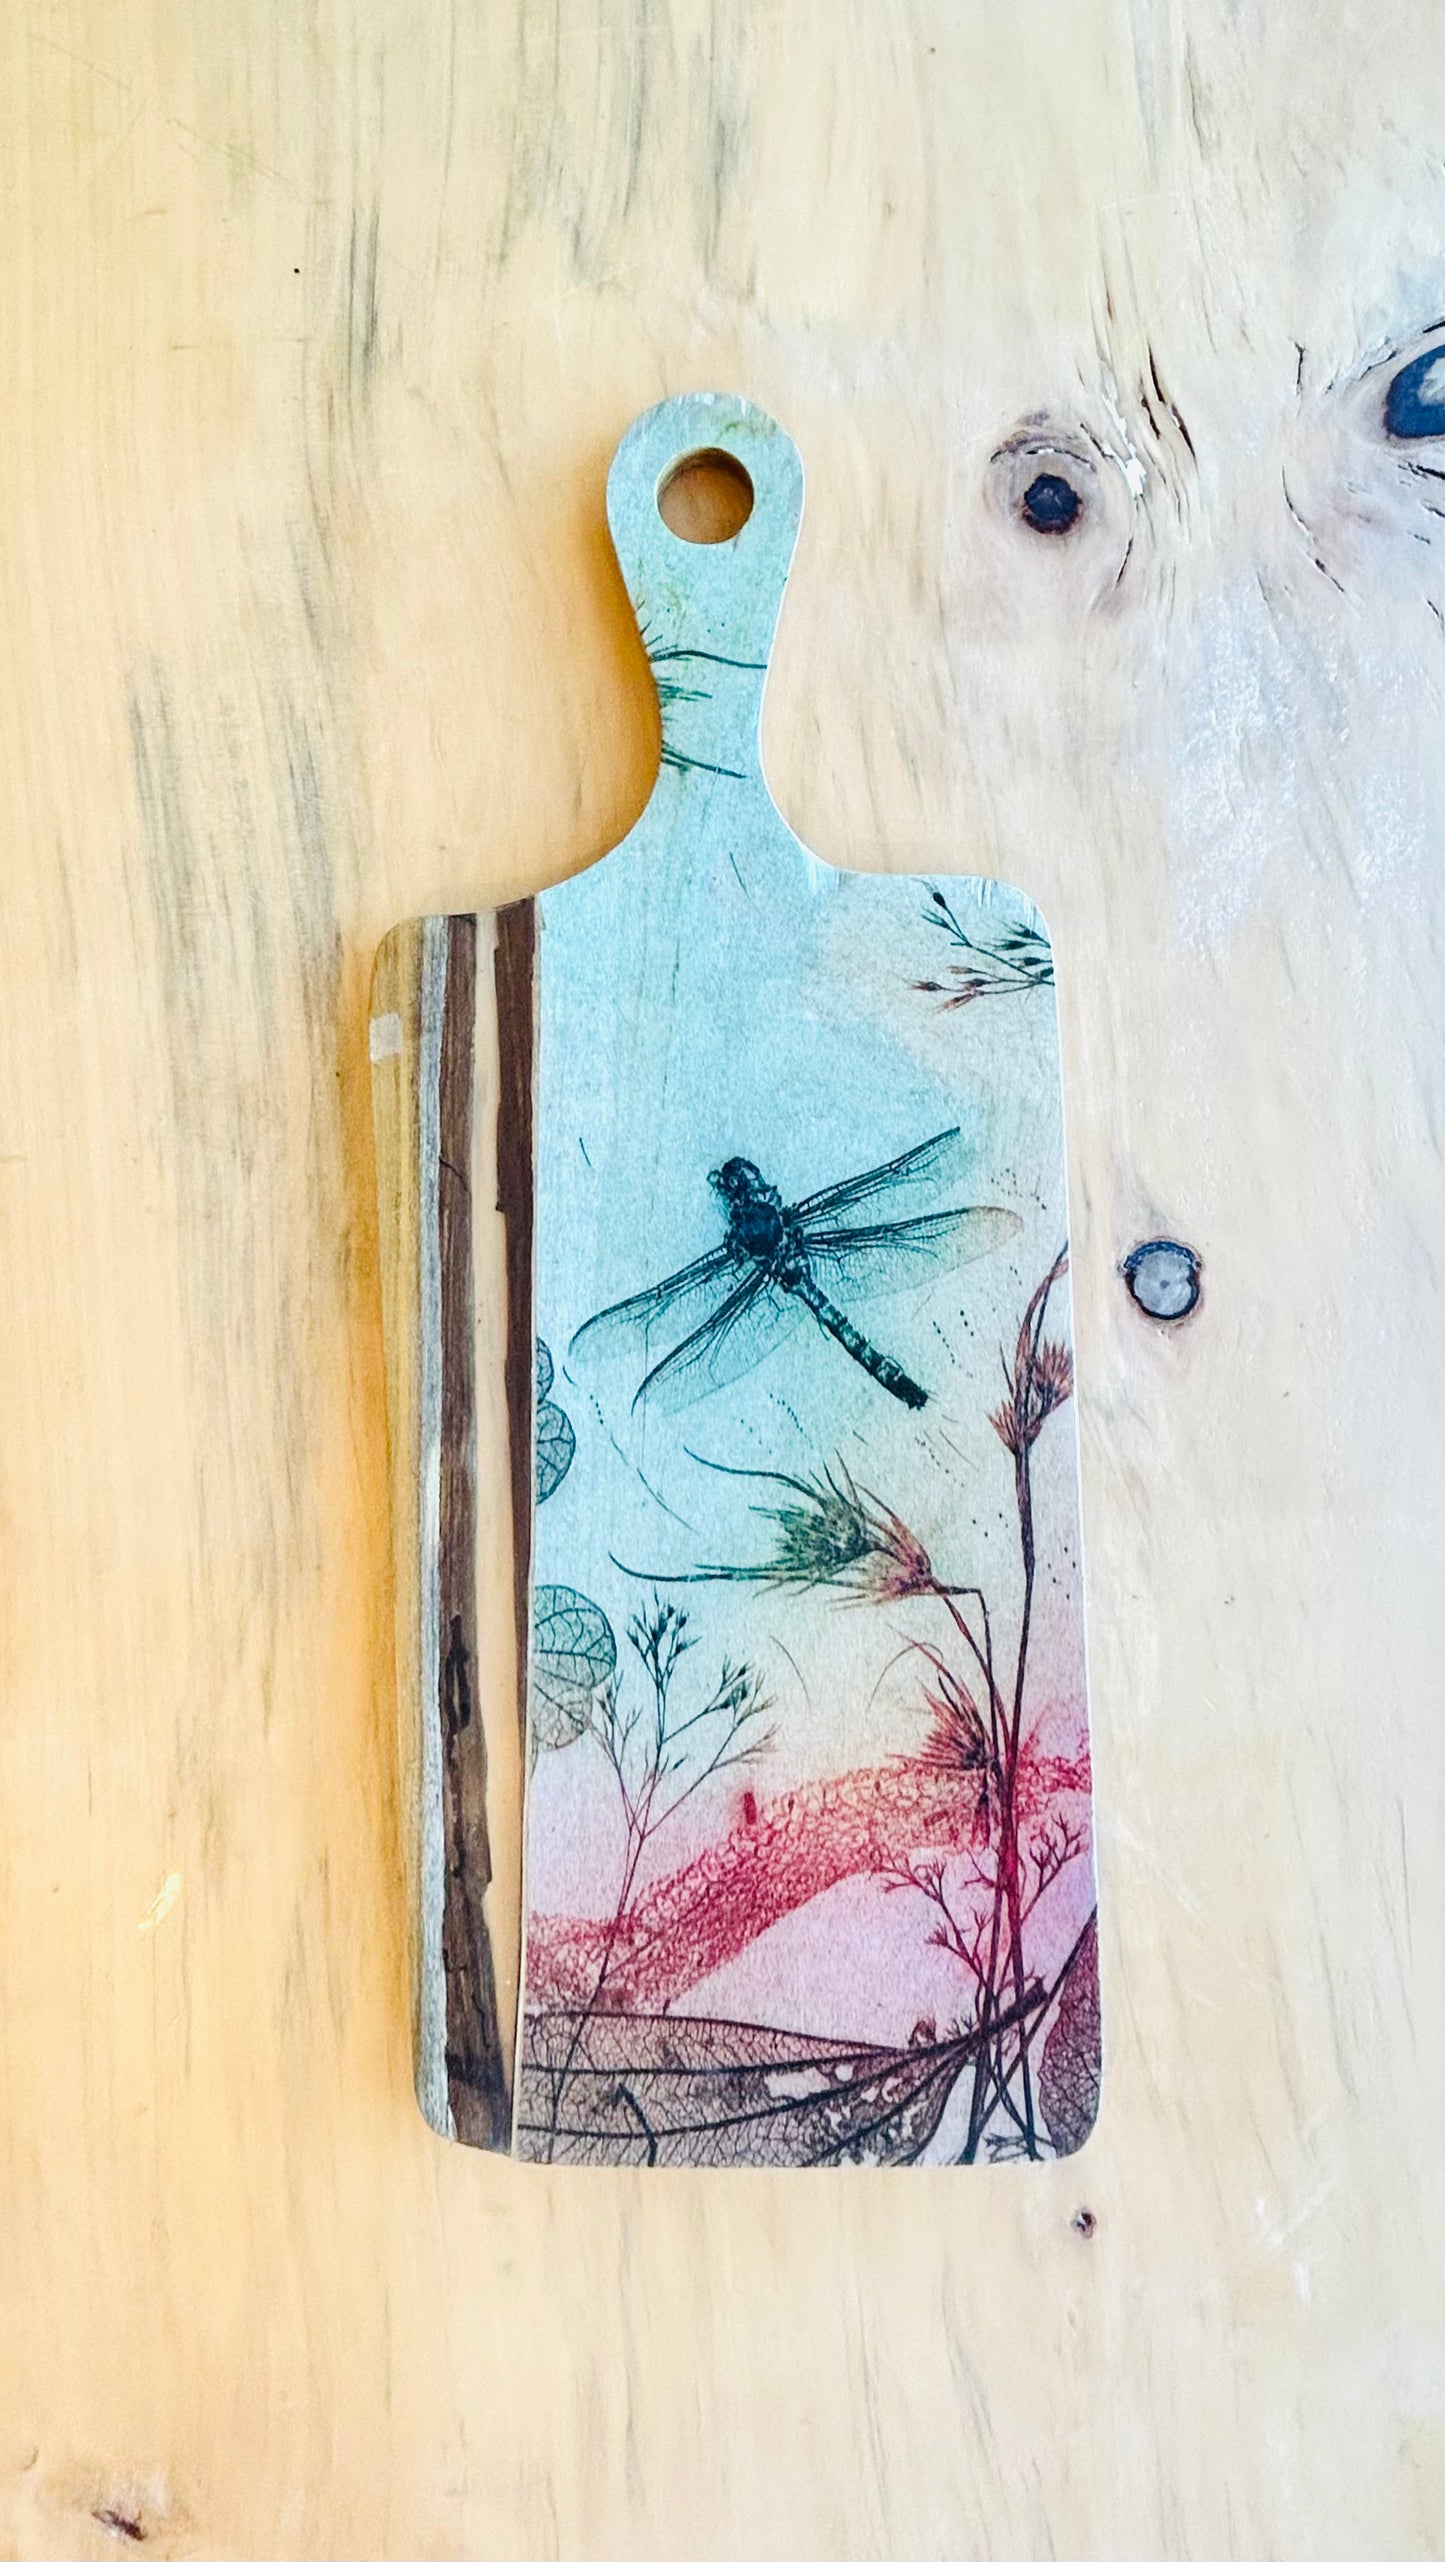 Wood and Resin Serving Board - Warm Dragonfly